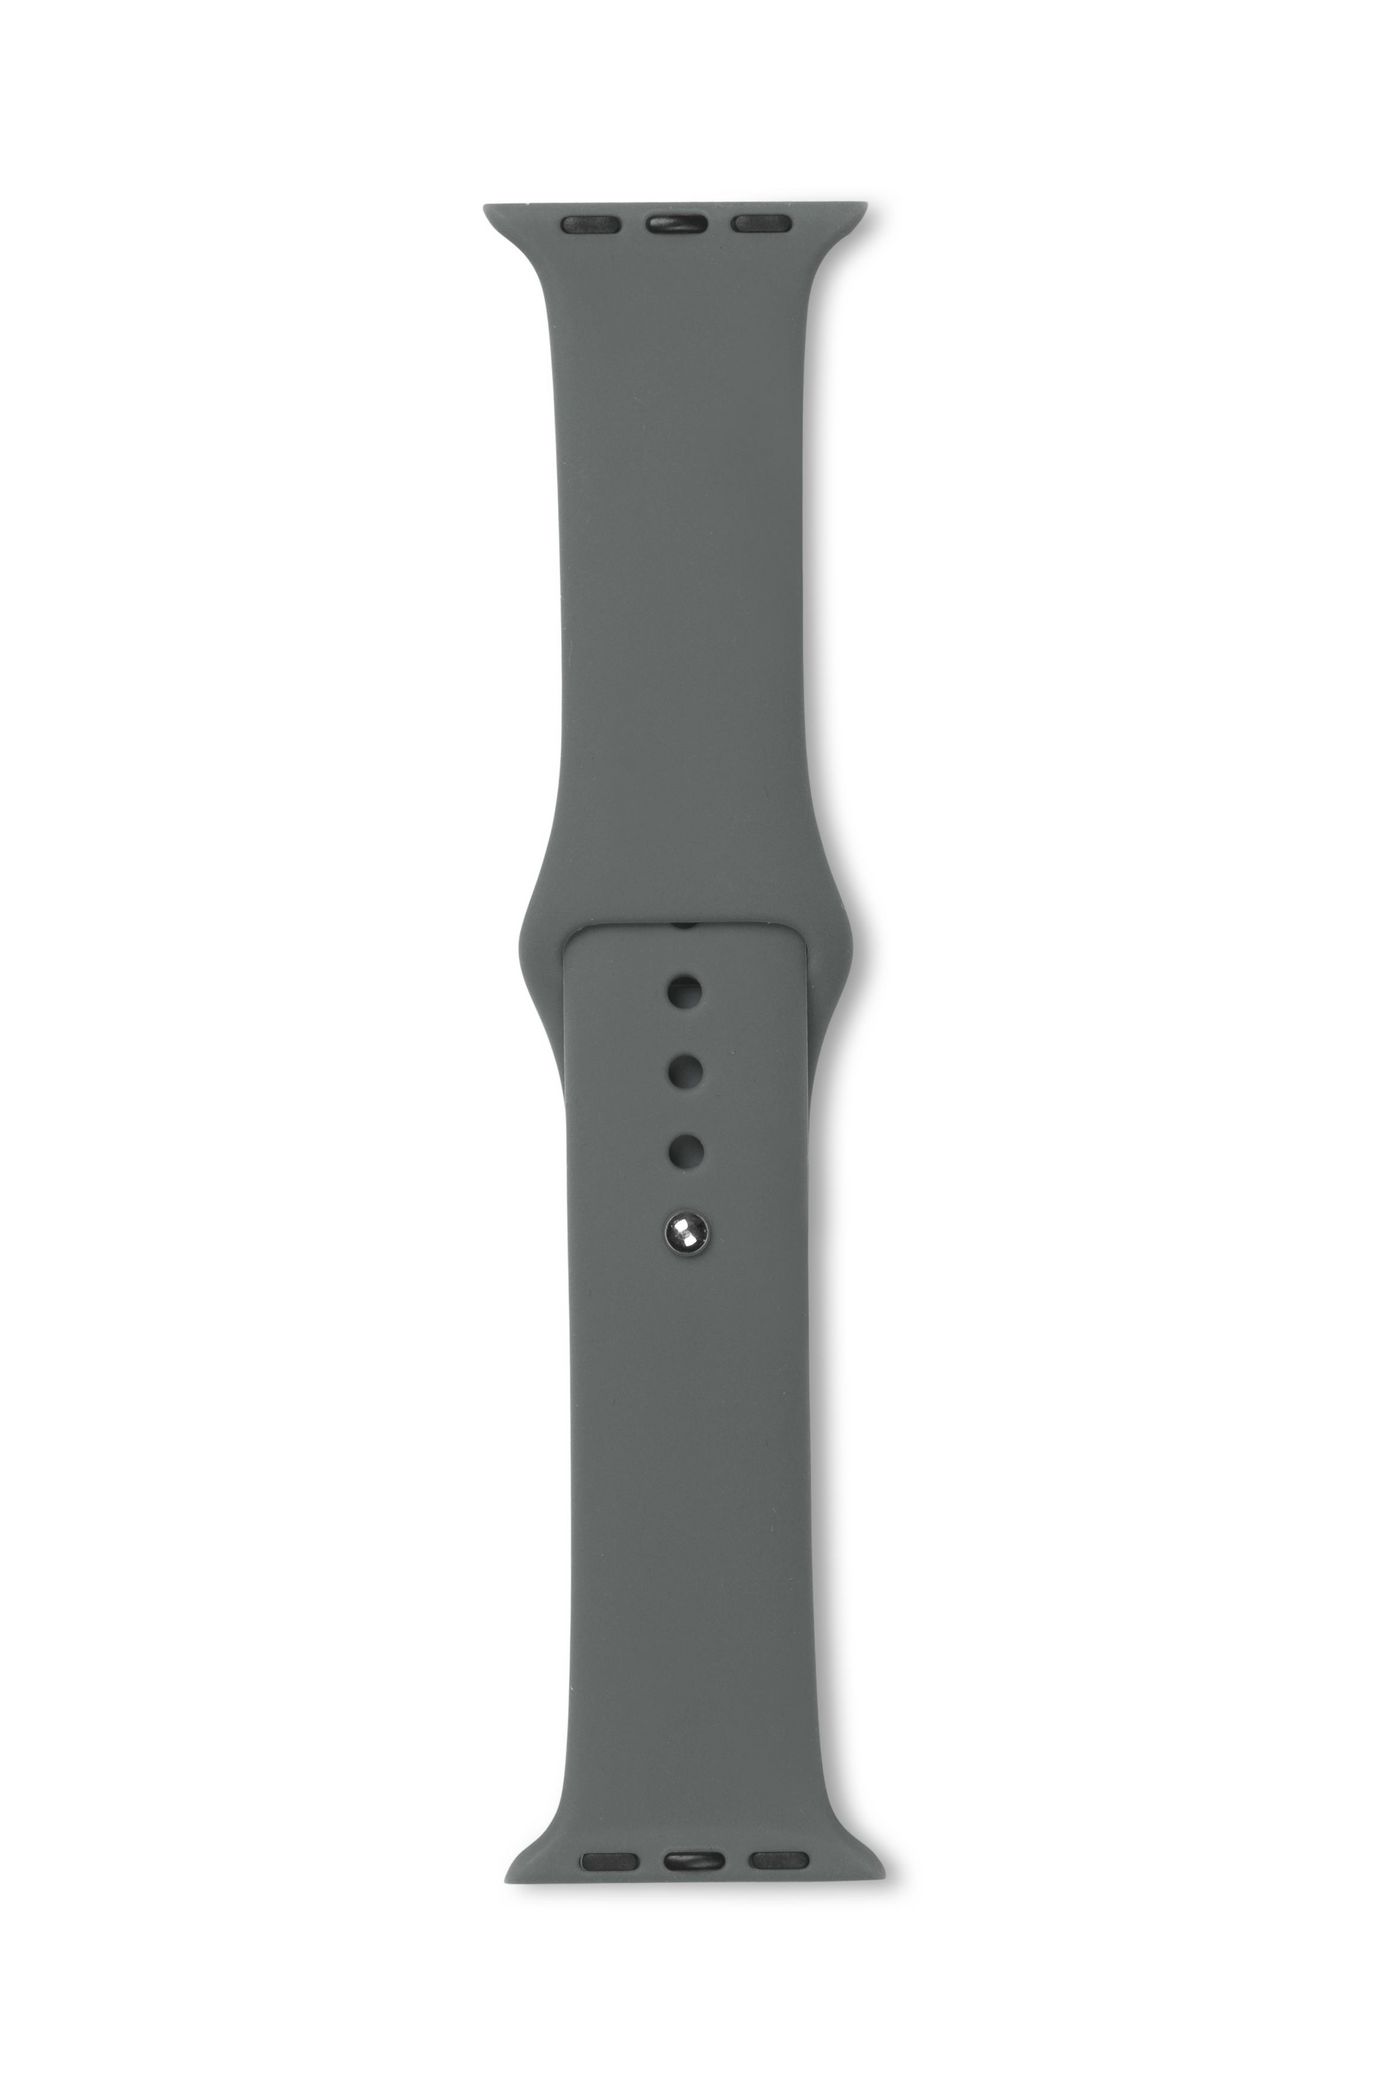 Apple Watch Silicone Strap Color: Olive. Width: 44 Mm